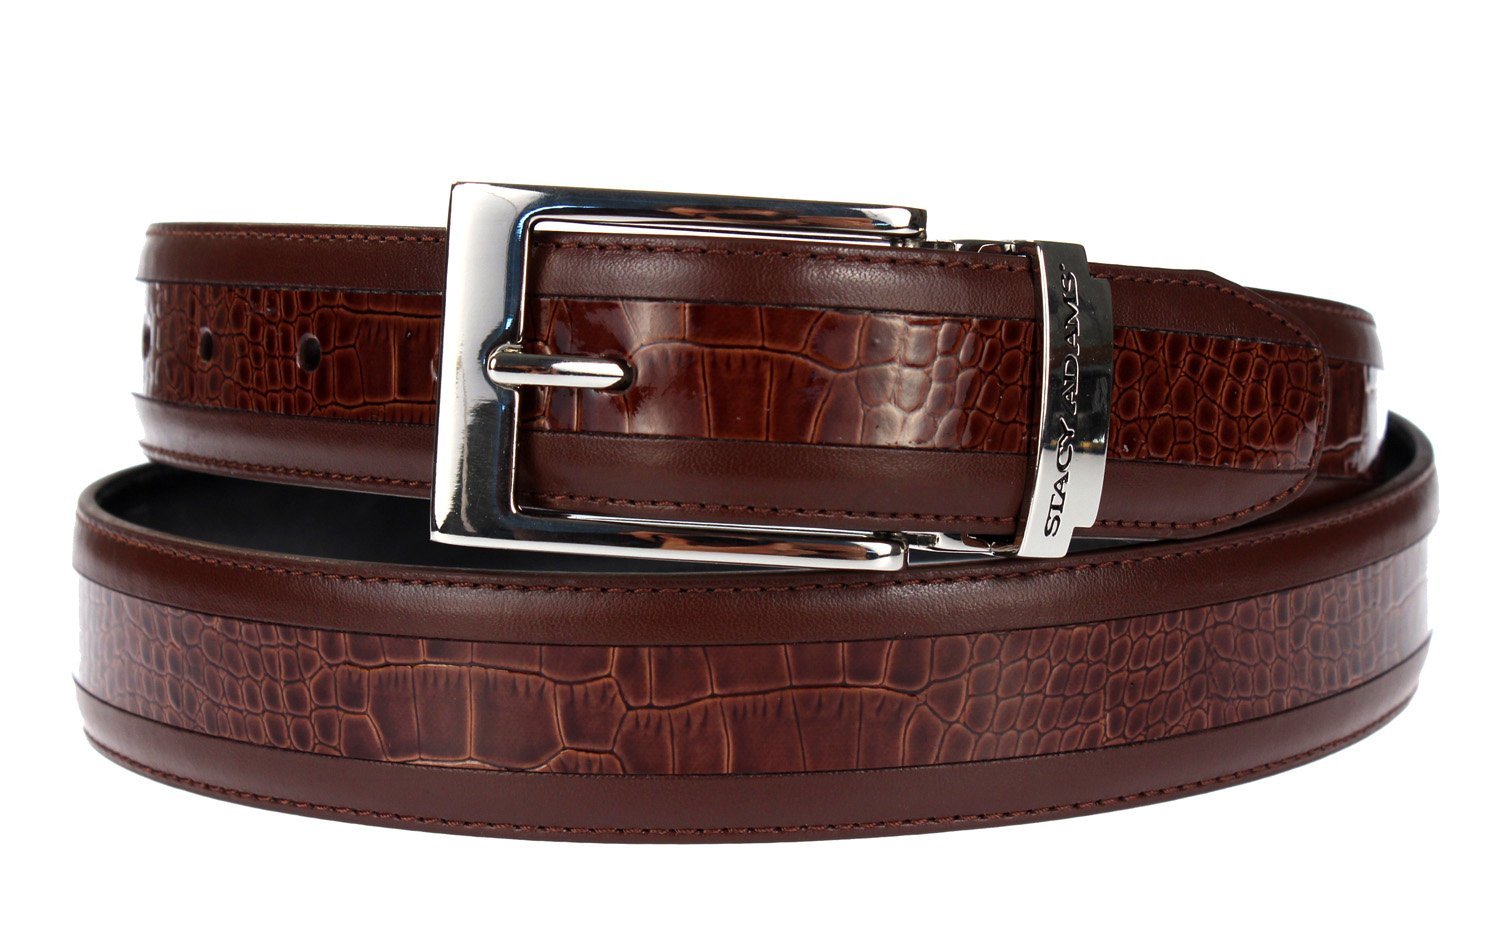 Stacy Adams Mens 6-203 Leather Belt w/ Croco Embossed Center Detail ...